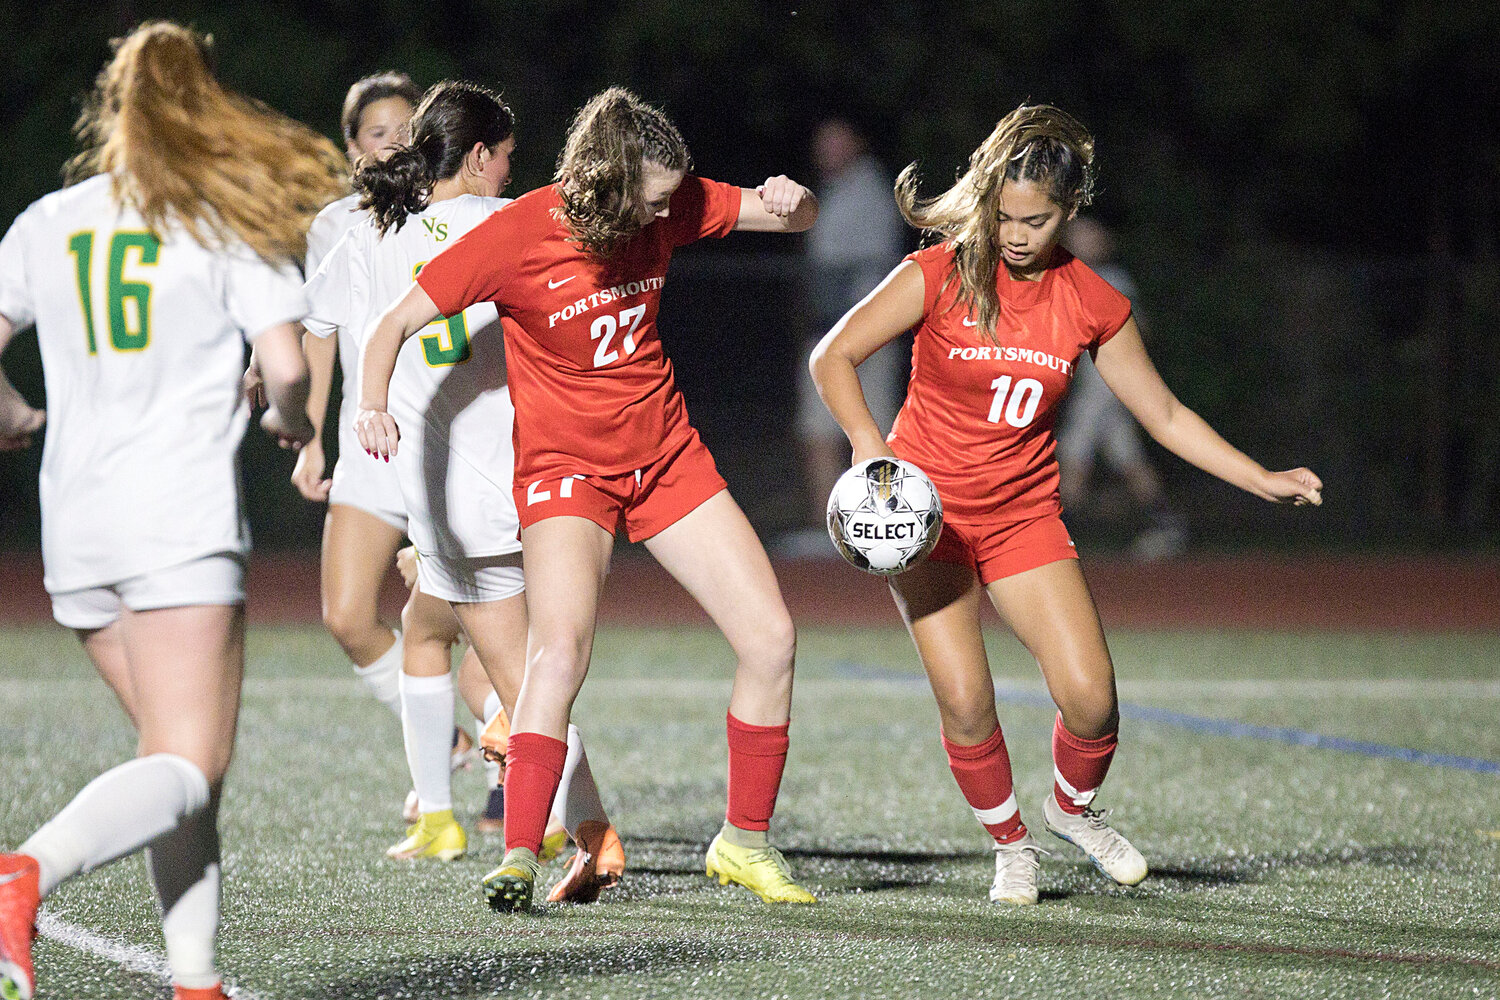 Lexi Owen (left) and Kylie Delemos work to settle a pass in front of the goal.